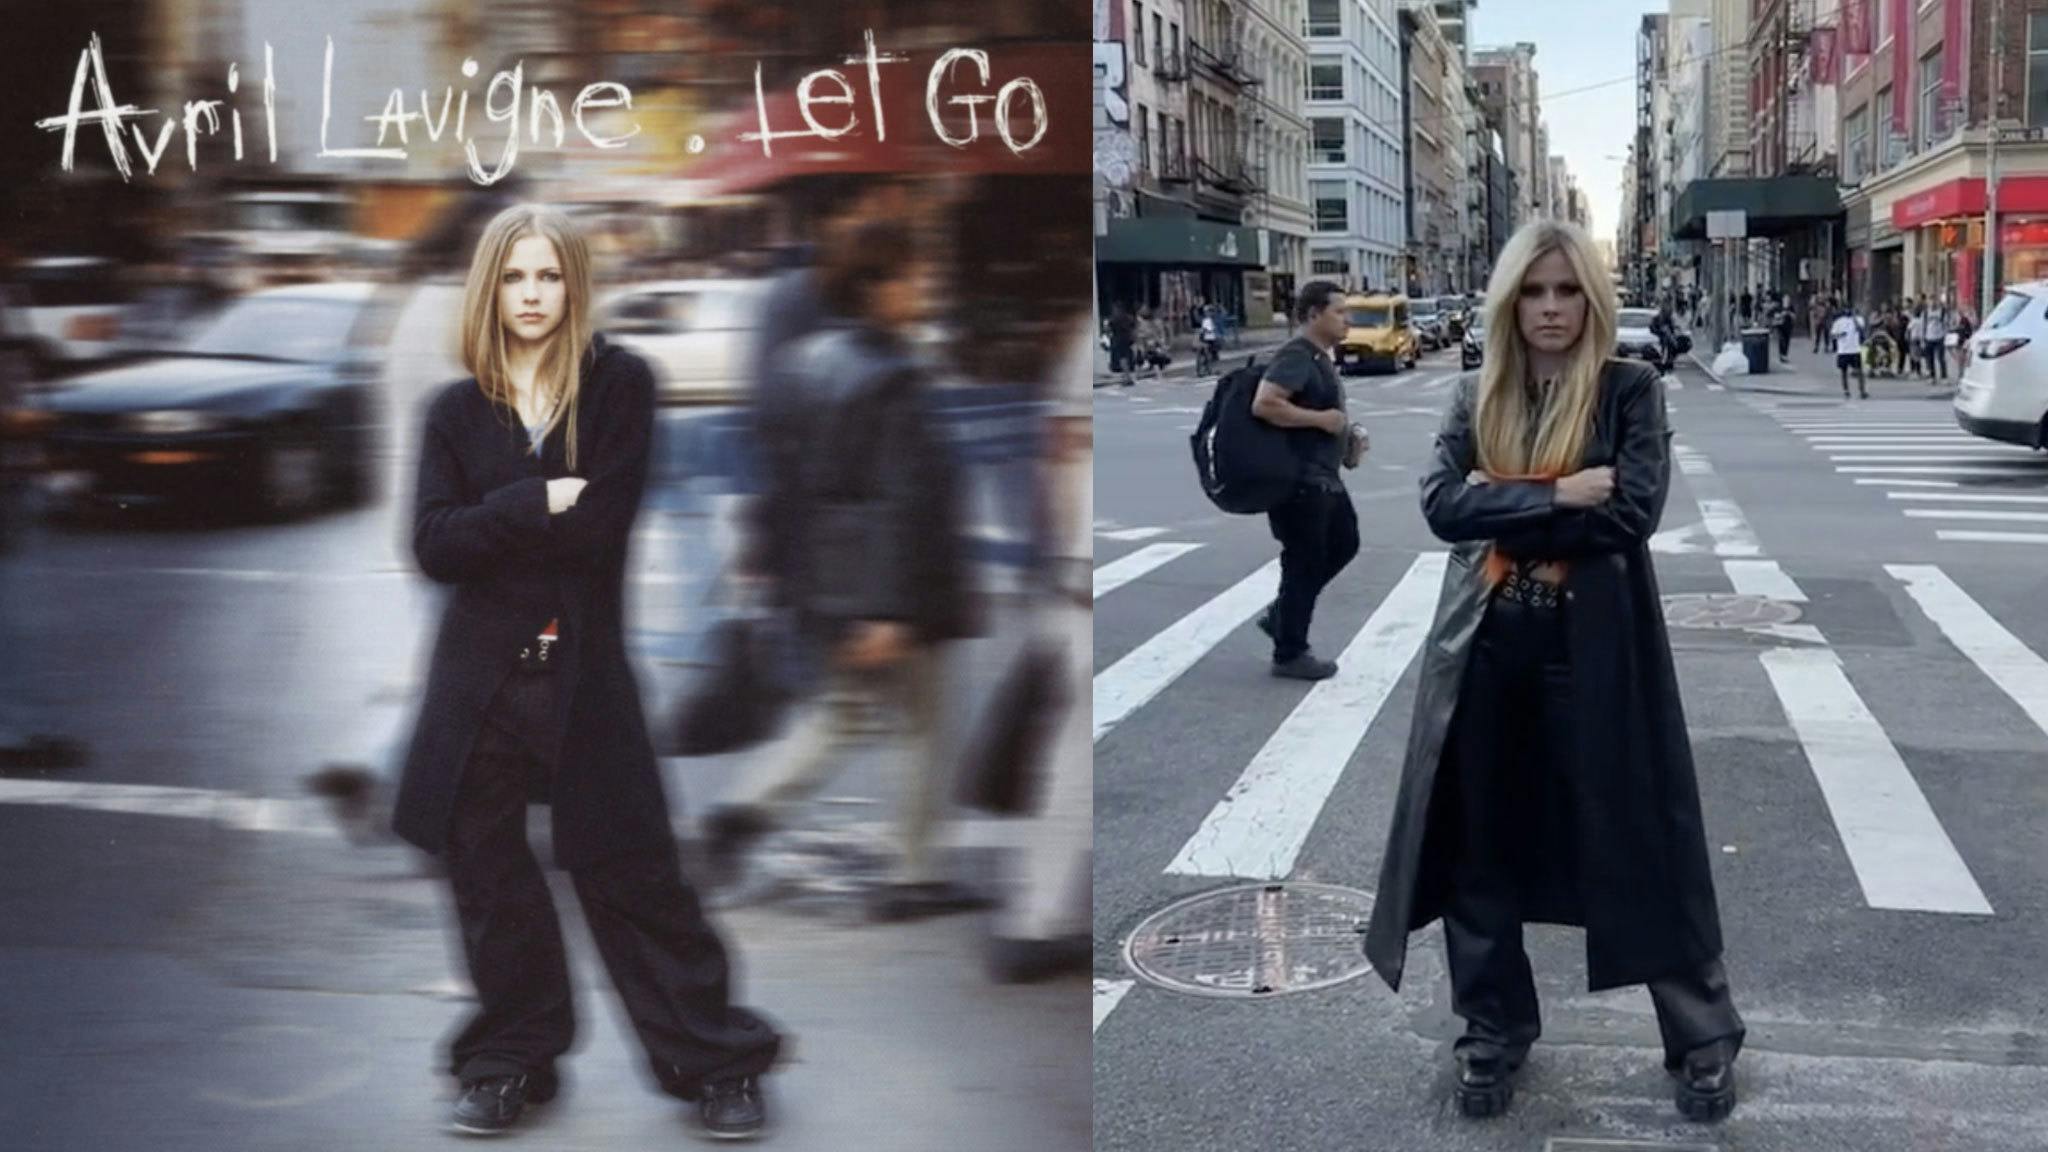 “20 years later…” See Avril Lavigne recreate her iconic Let Go album cover